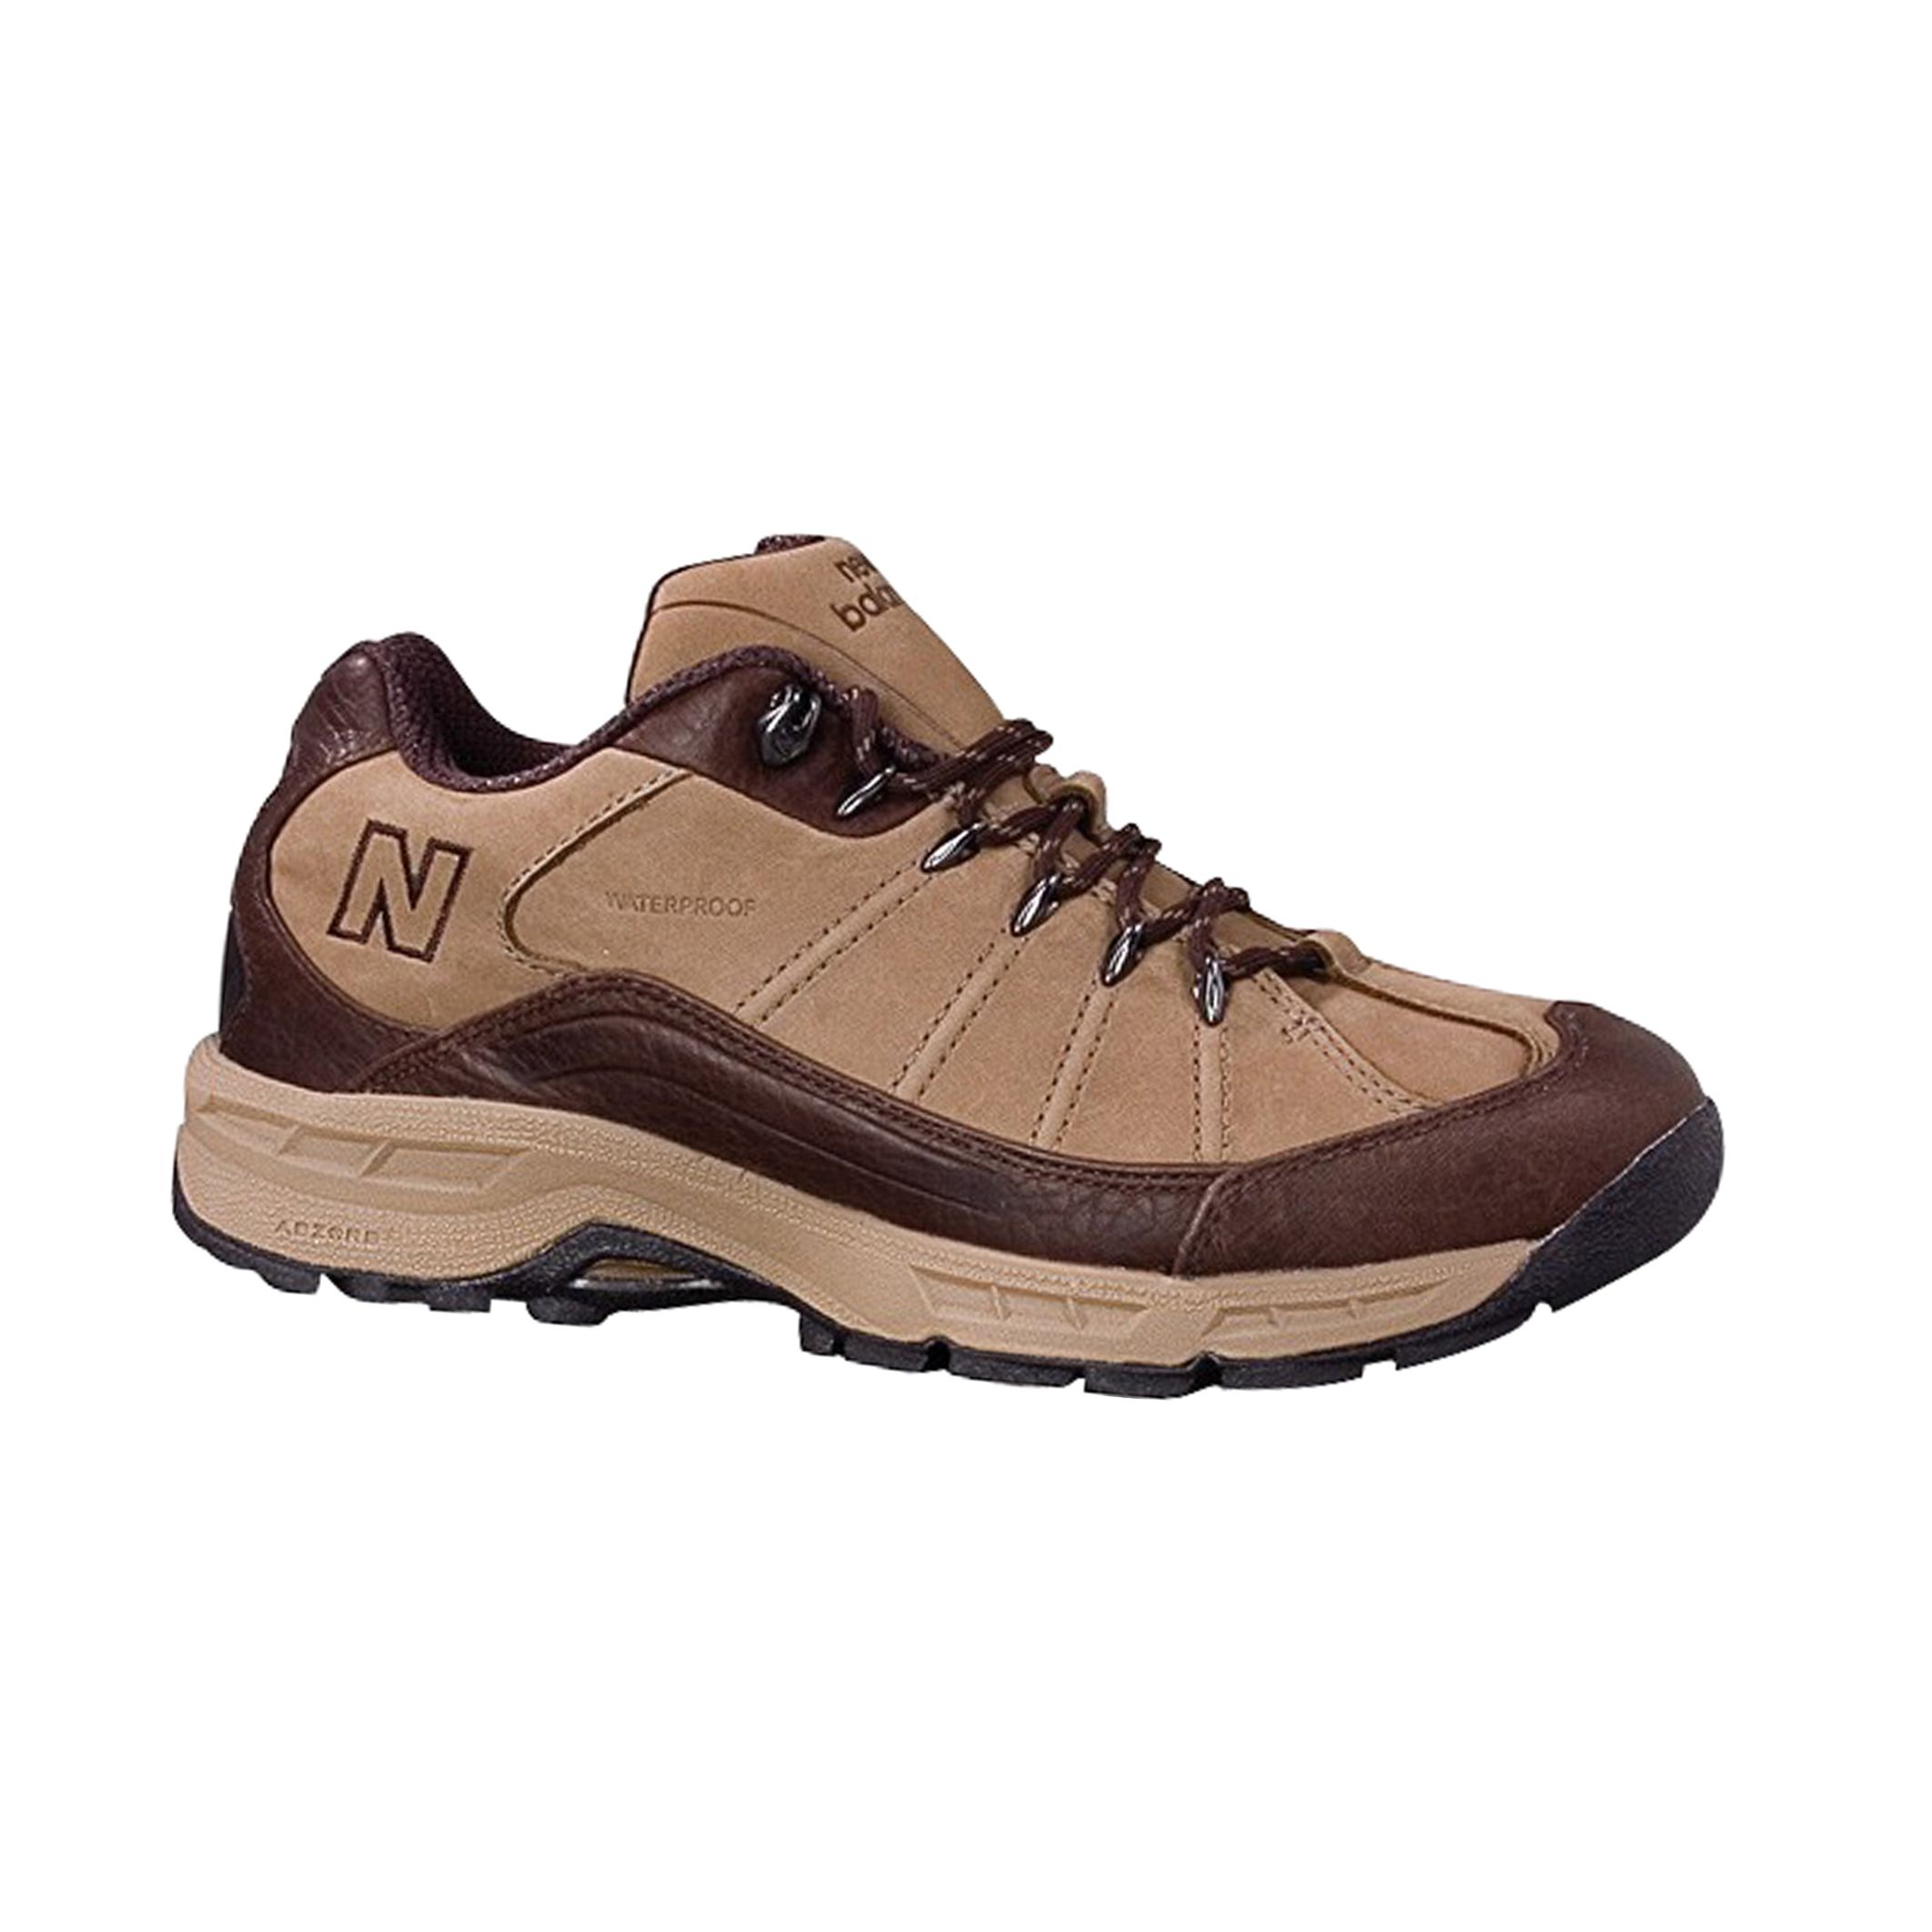 New Balance Men's Country 966 Shoe - Brown - Clothing, Shoes ...